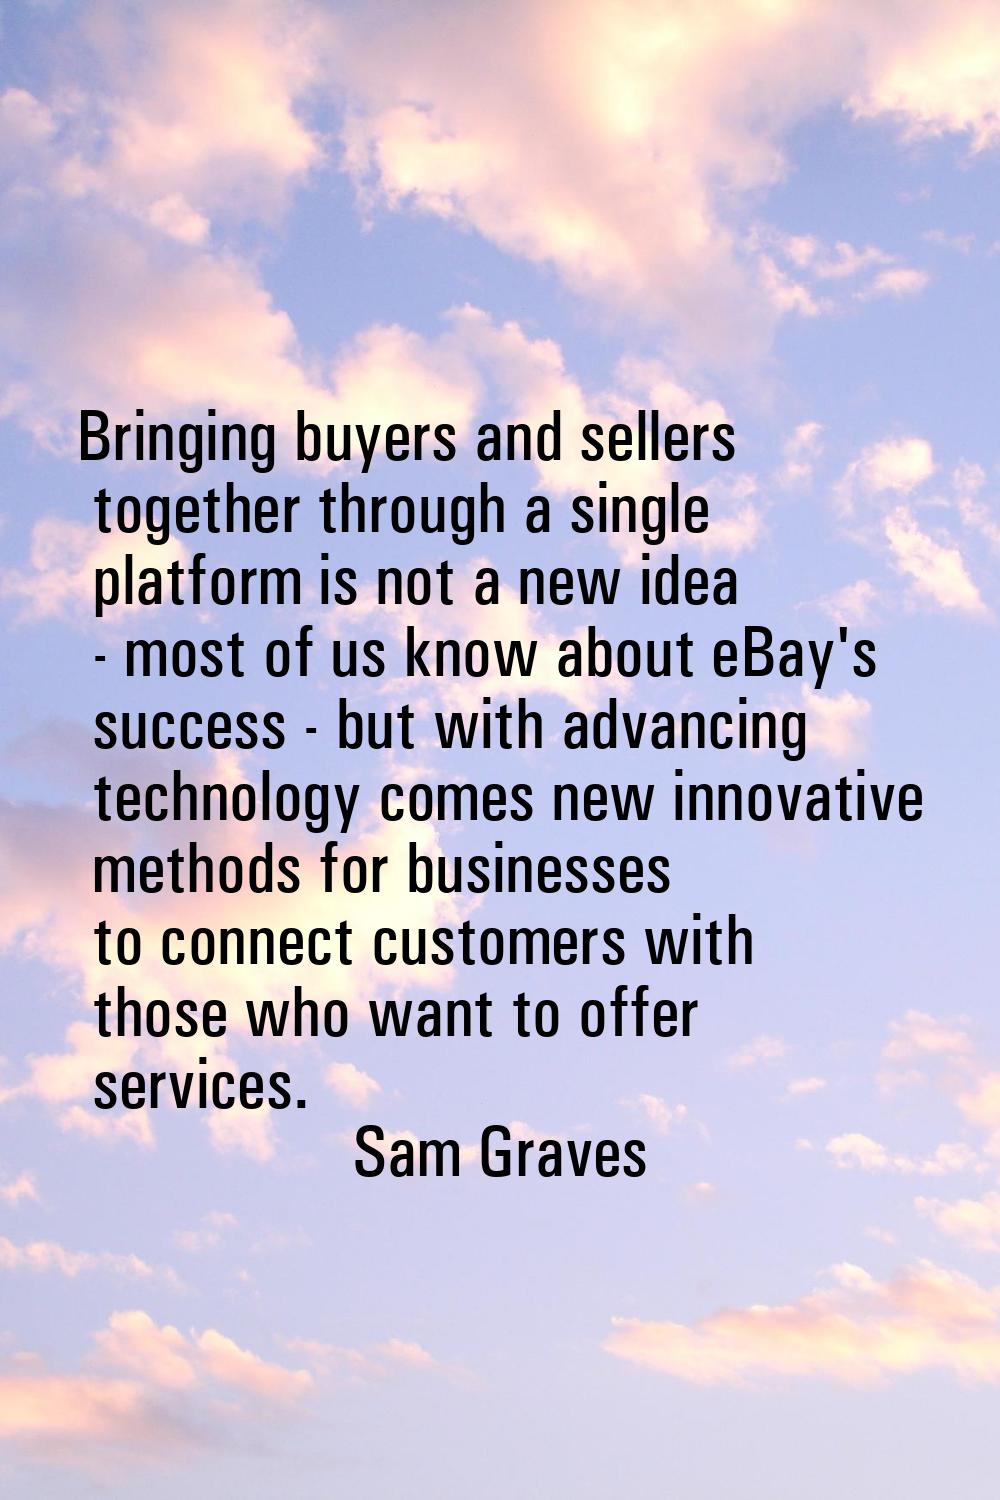 Bringing buyers and sellers together through a single platform is not a new idea - most of us know 